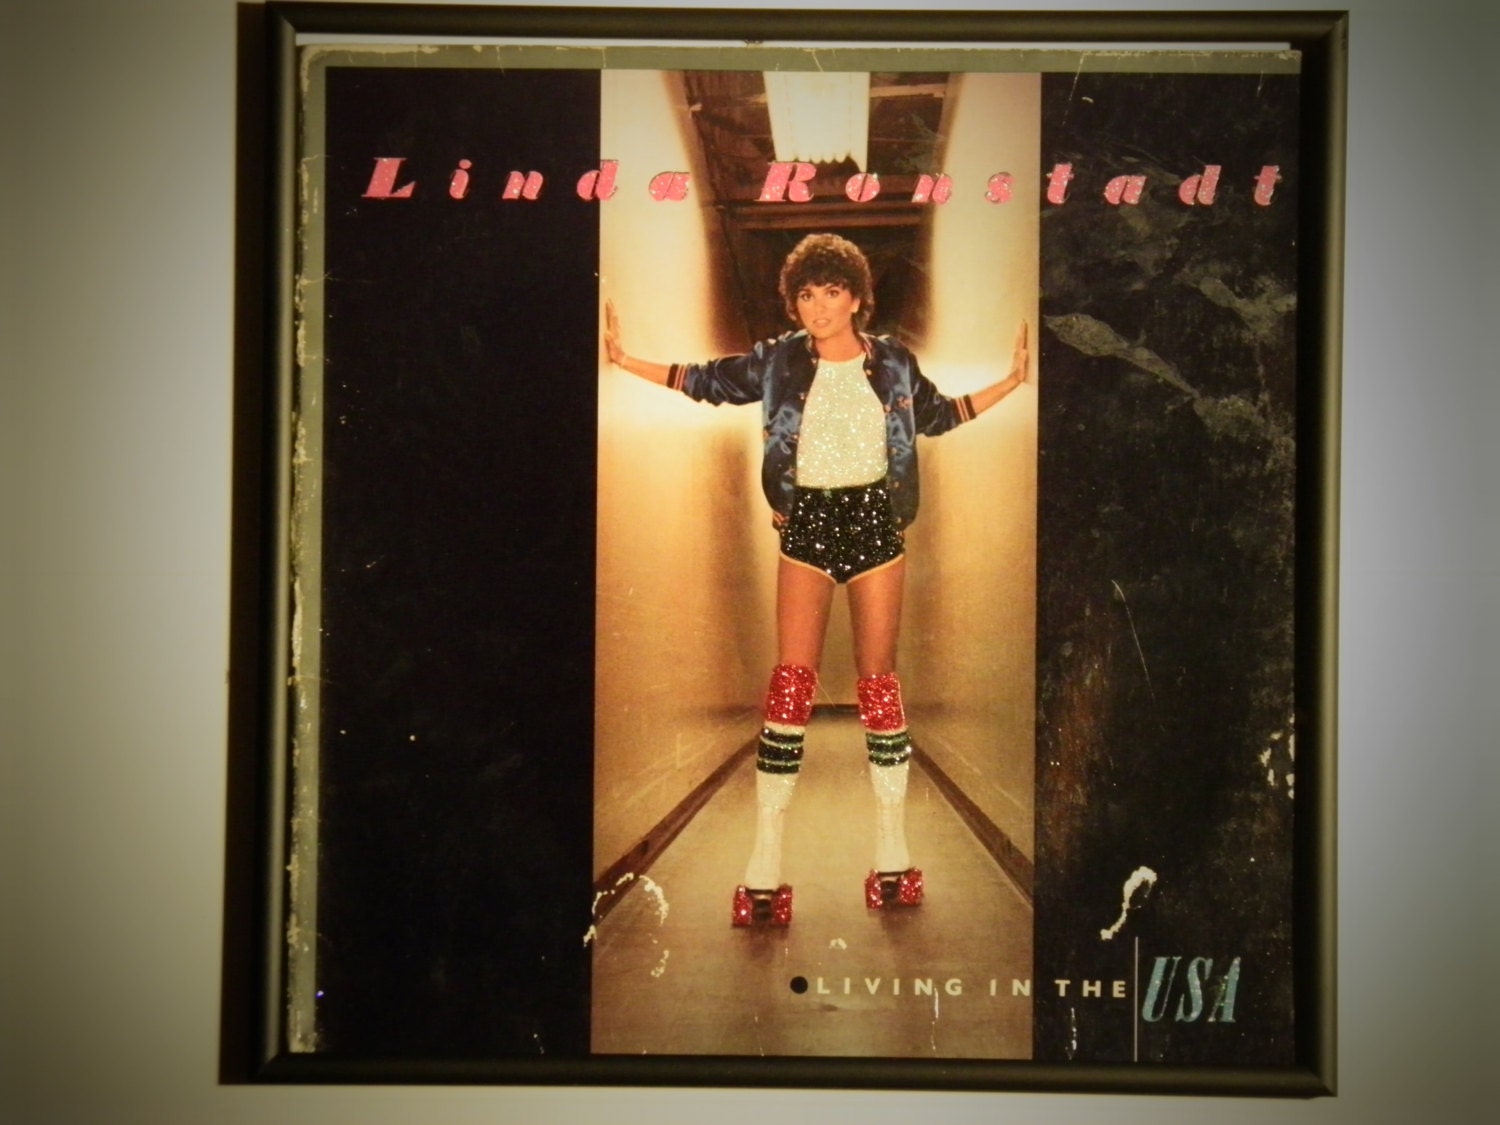 Glittered Record Album - Linda Ronstadt - Living in the USA